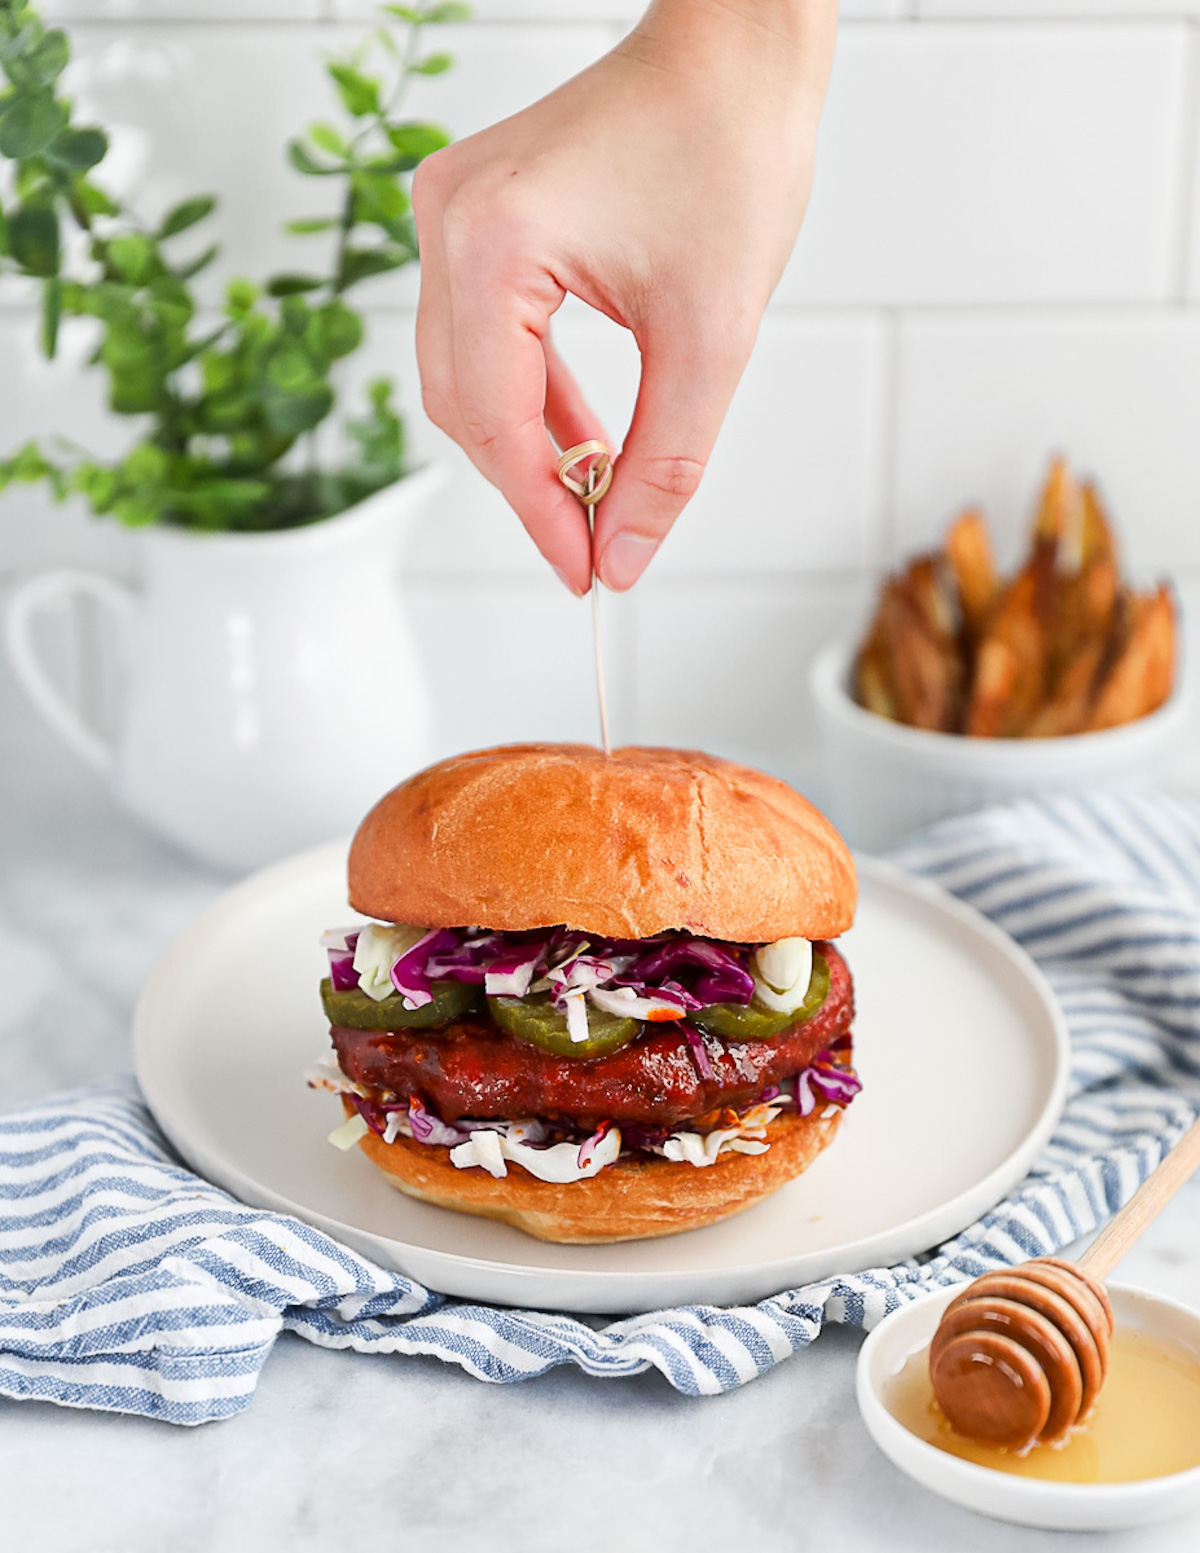 A hand placing a toothpick in a vegan fried chicken sandwich